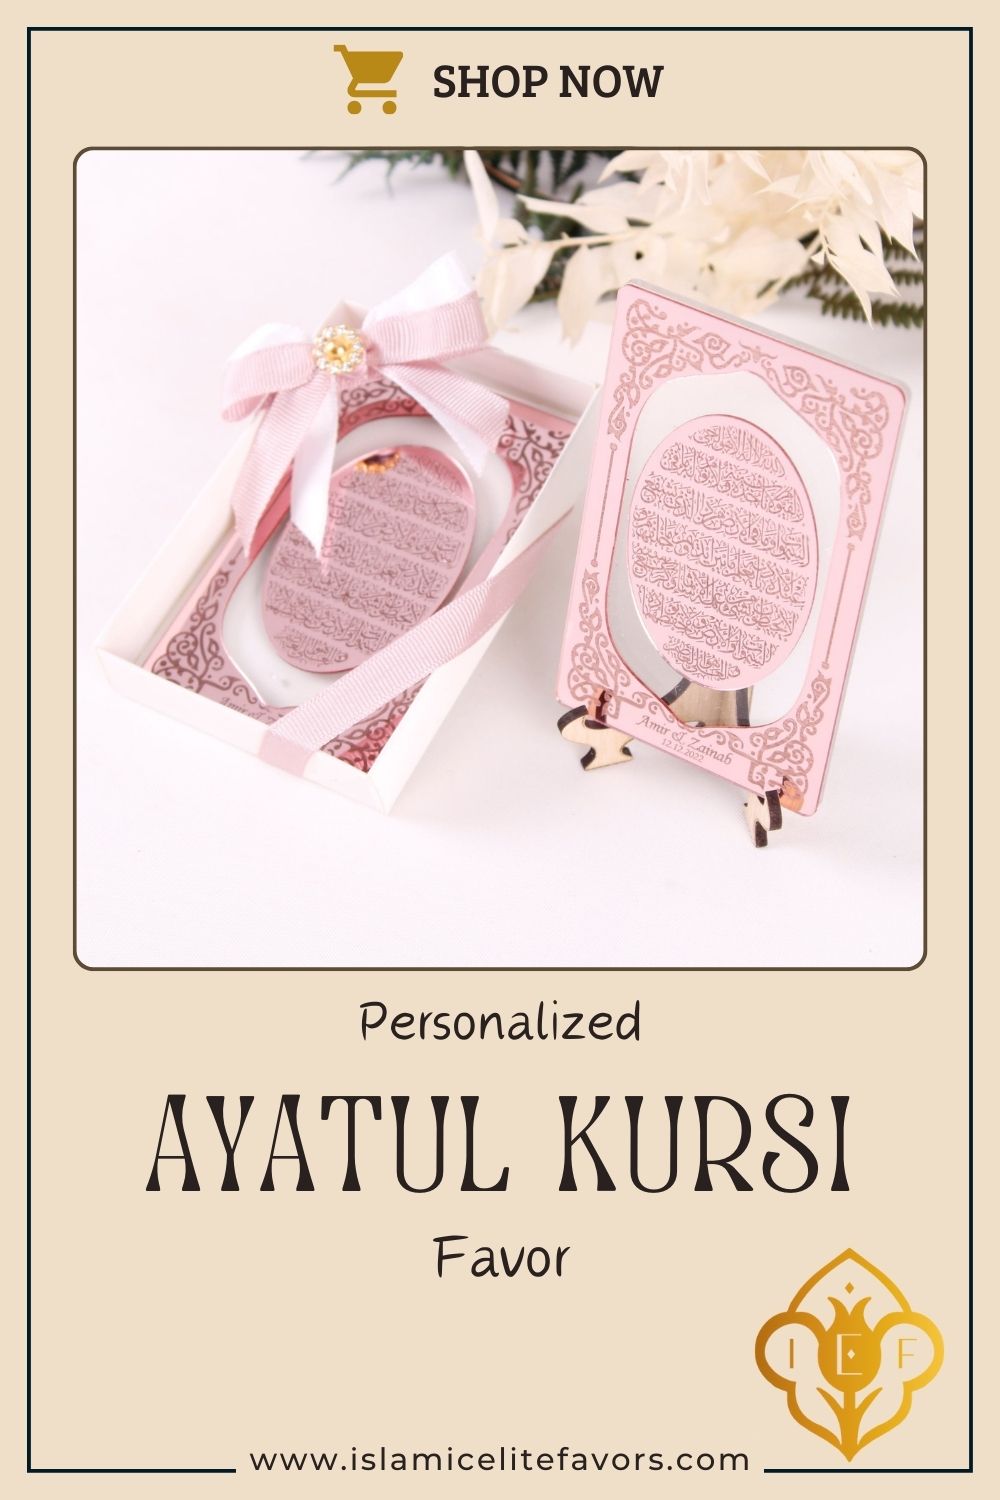 Personalized Wedding Favor Ayatul Kursi on Stand Rose Gold Clear Plexi - Islamic Elite Favors is a handmade gift shop offering a wide variety of unique and personalized gifts for all occasions. Whether you're looking for the perfect Ramadan, Eid, Hajj, wedding gift or something special for a birthday, baby shower or anniversary, we have something for everyone. High quality, made with love.